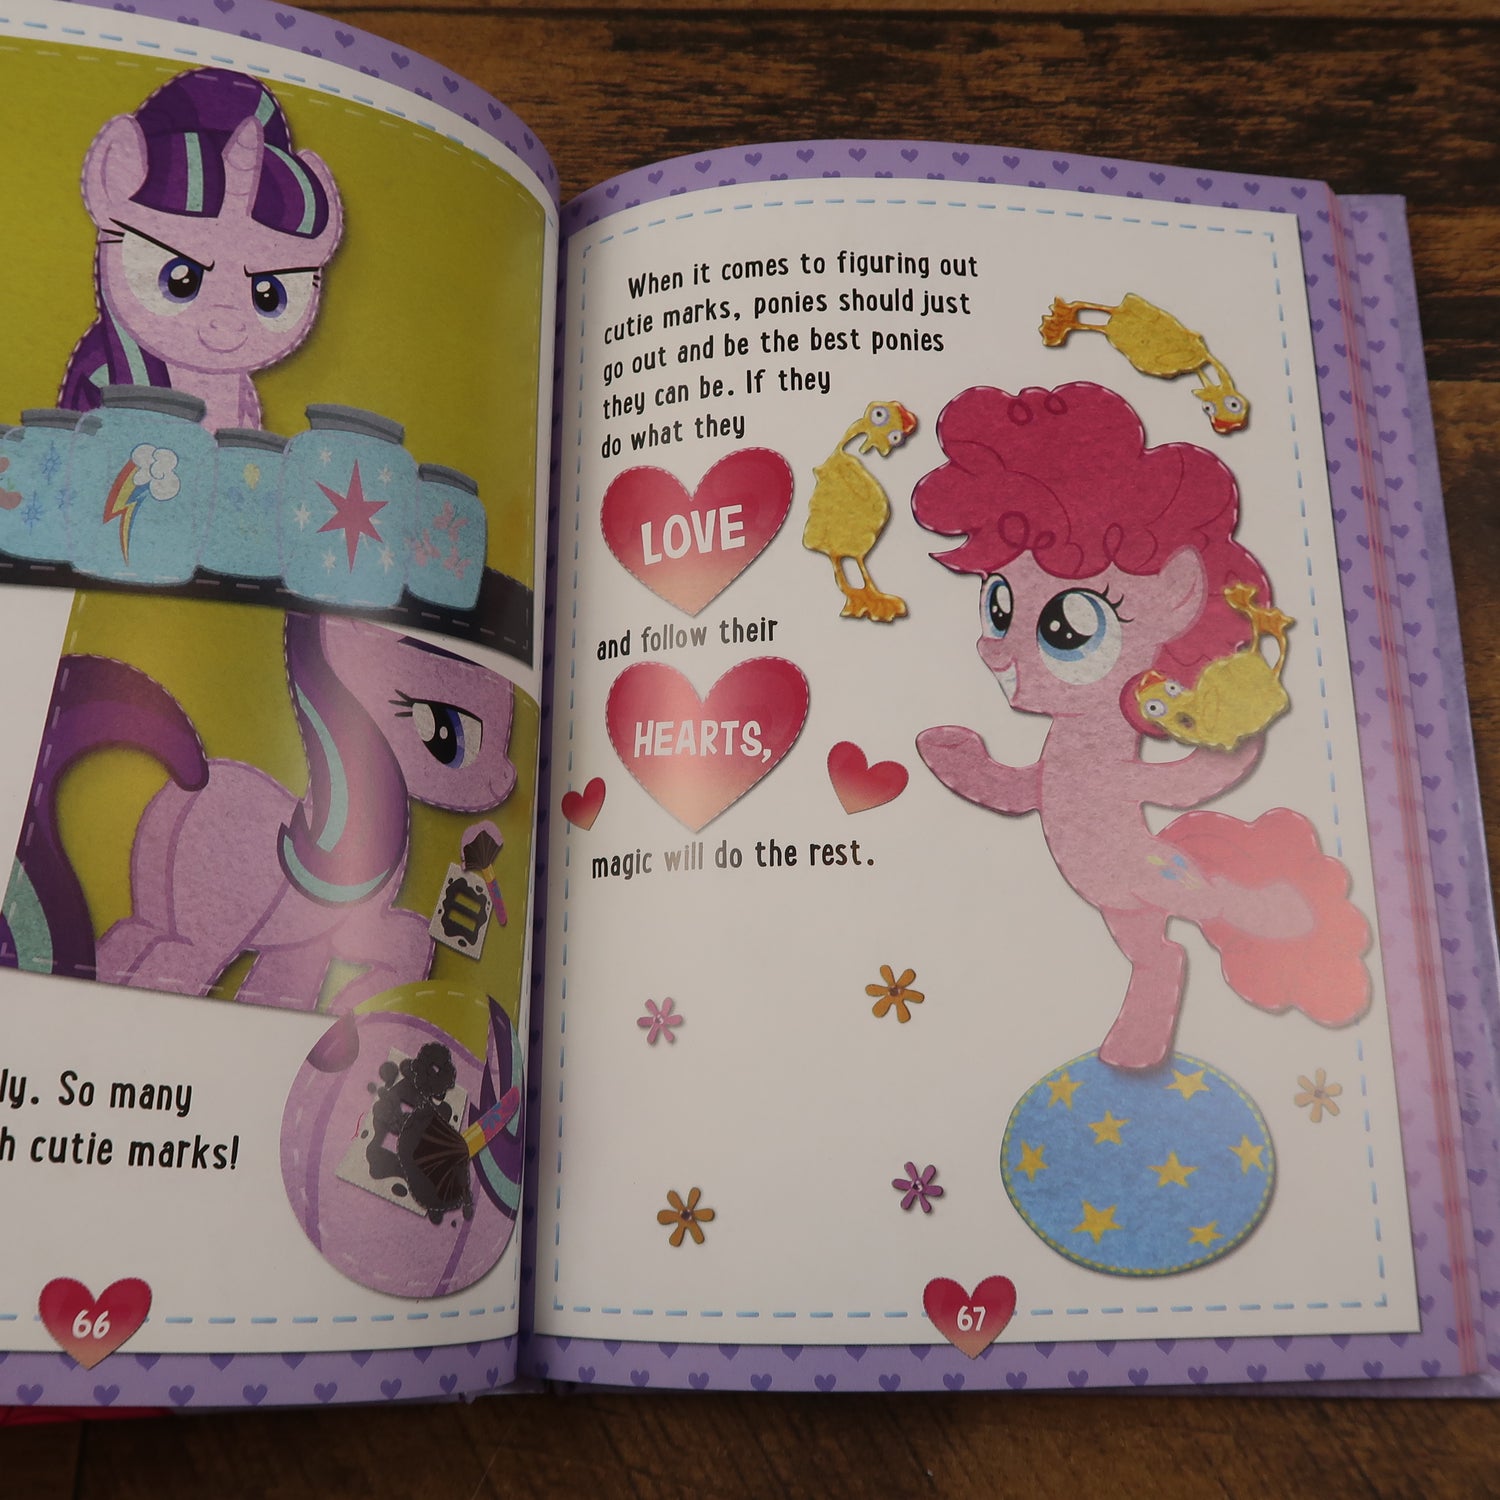 My Little Pony - 5 Minute Stories